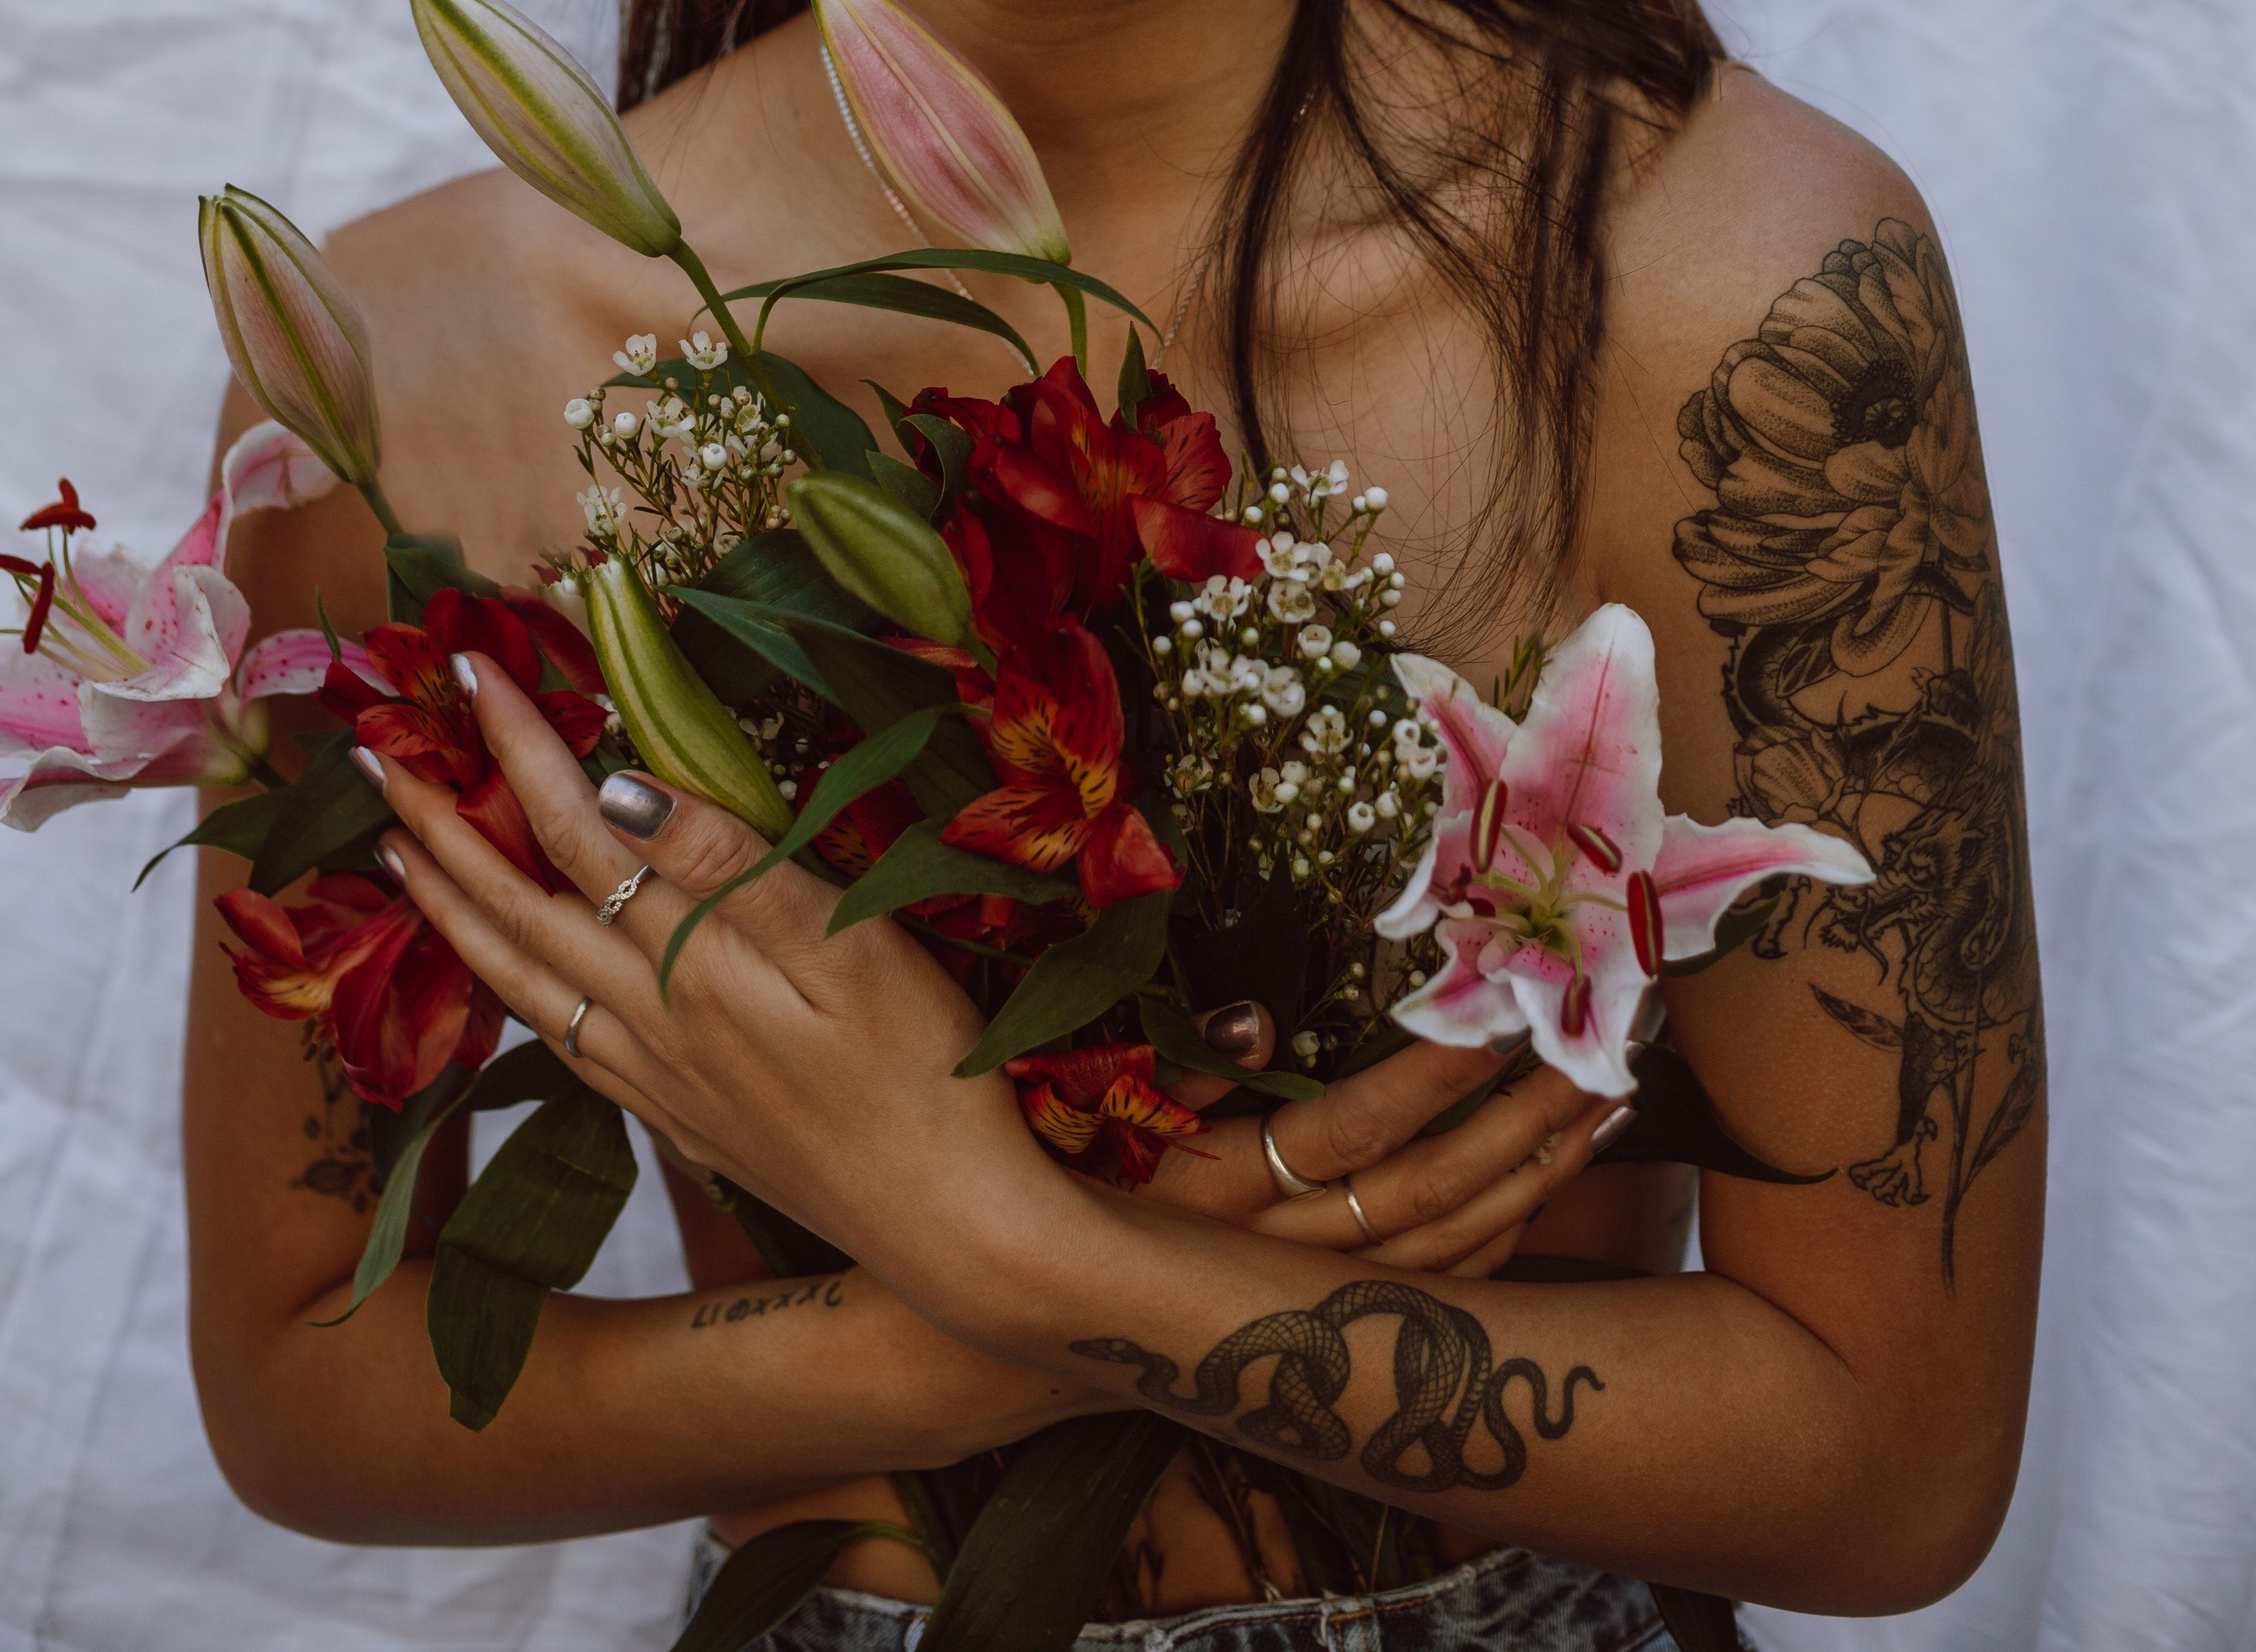 10 reasons to invest in a tattoo franchise